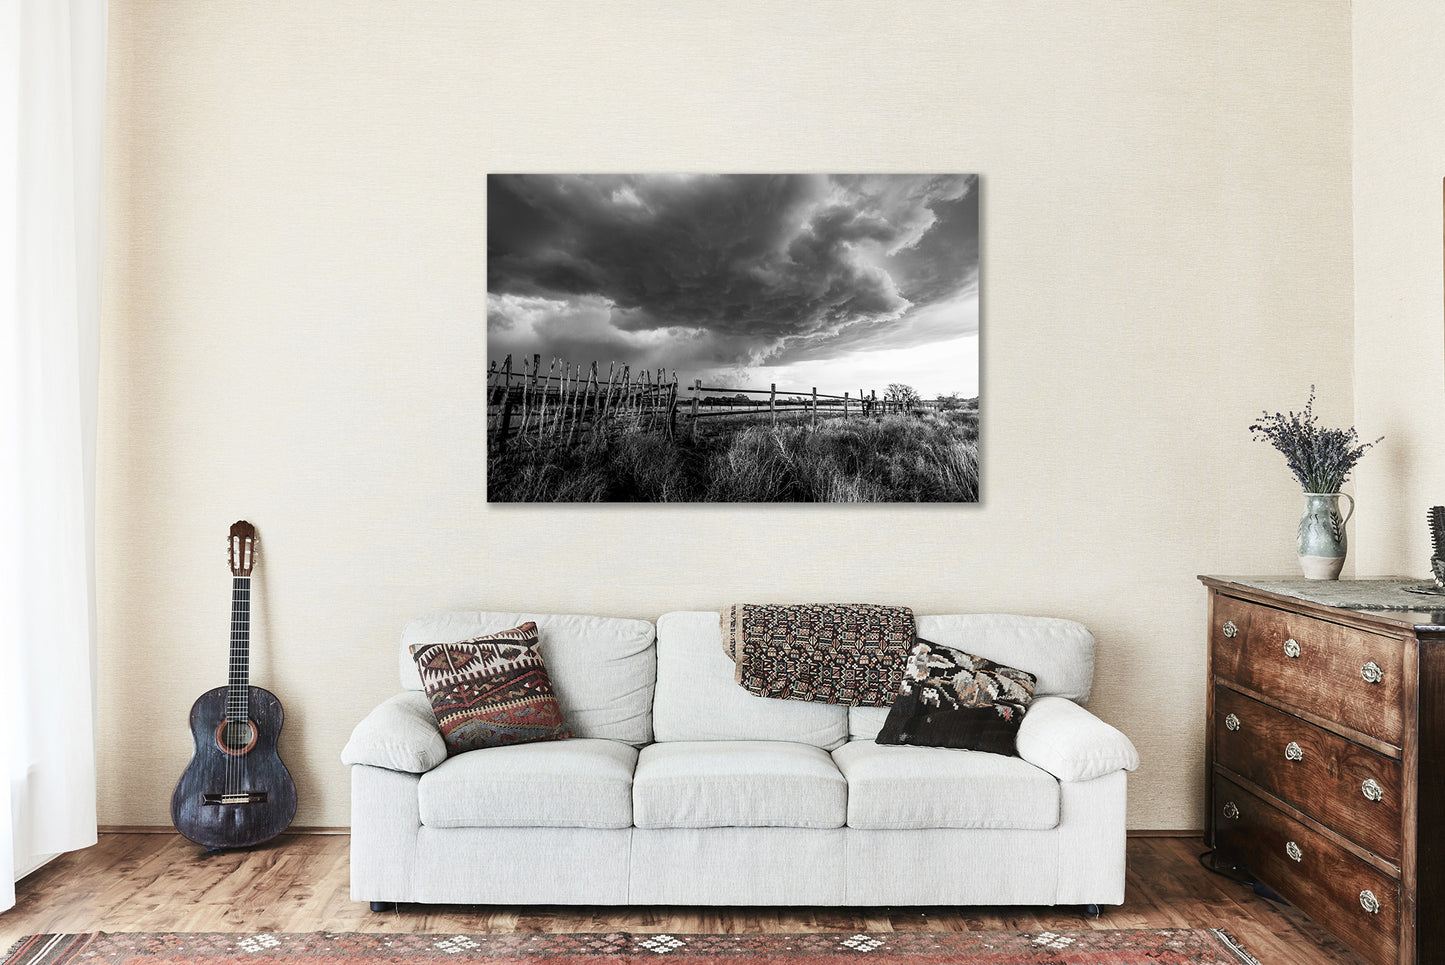 Canvas Wall Art | Storm Over Ranch Fence Picture | Black and White Thunderstorm Gallery Wrap | Oklahoma Photography | Western Decor